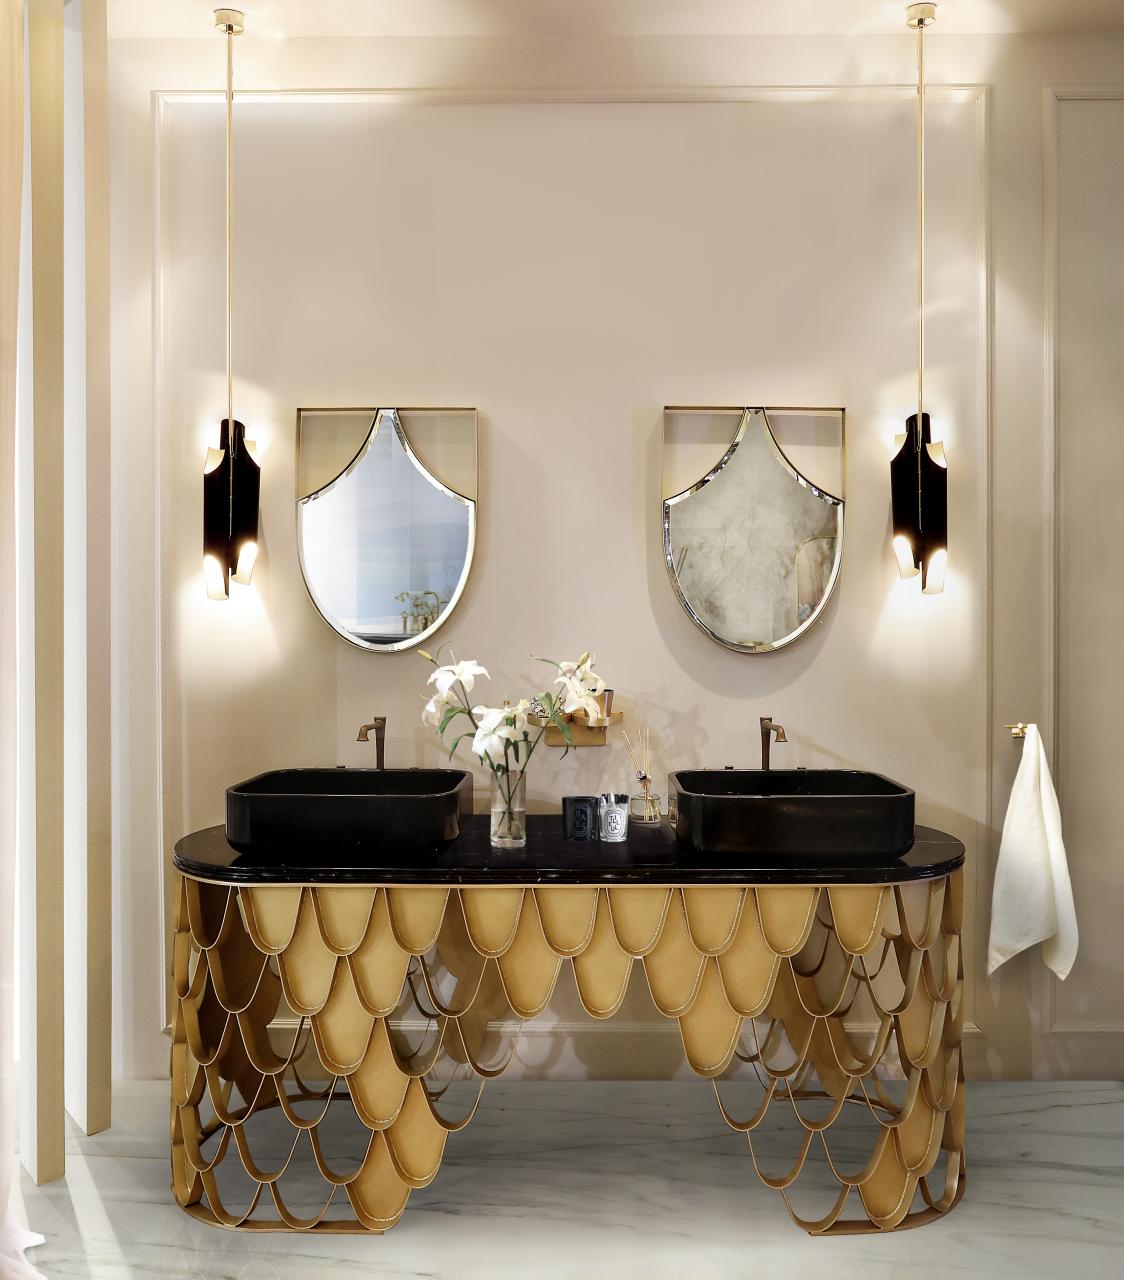 5 MustHaves for a HighEnd Bathroom Design